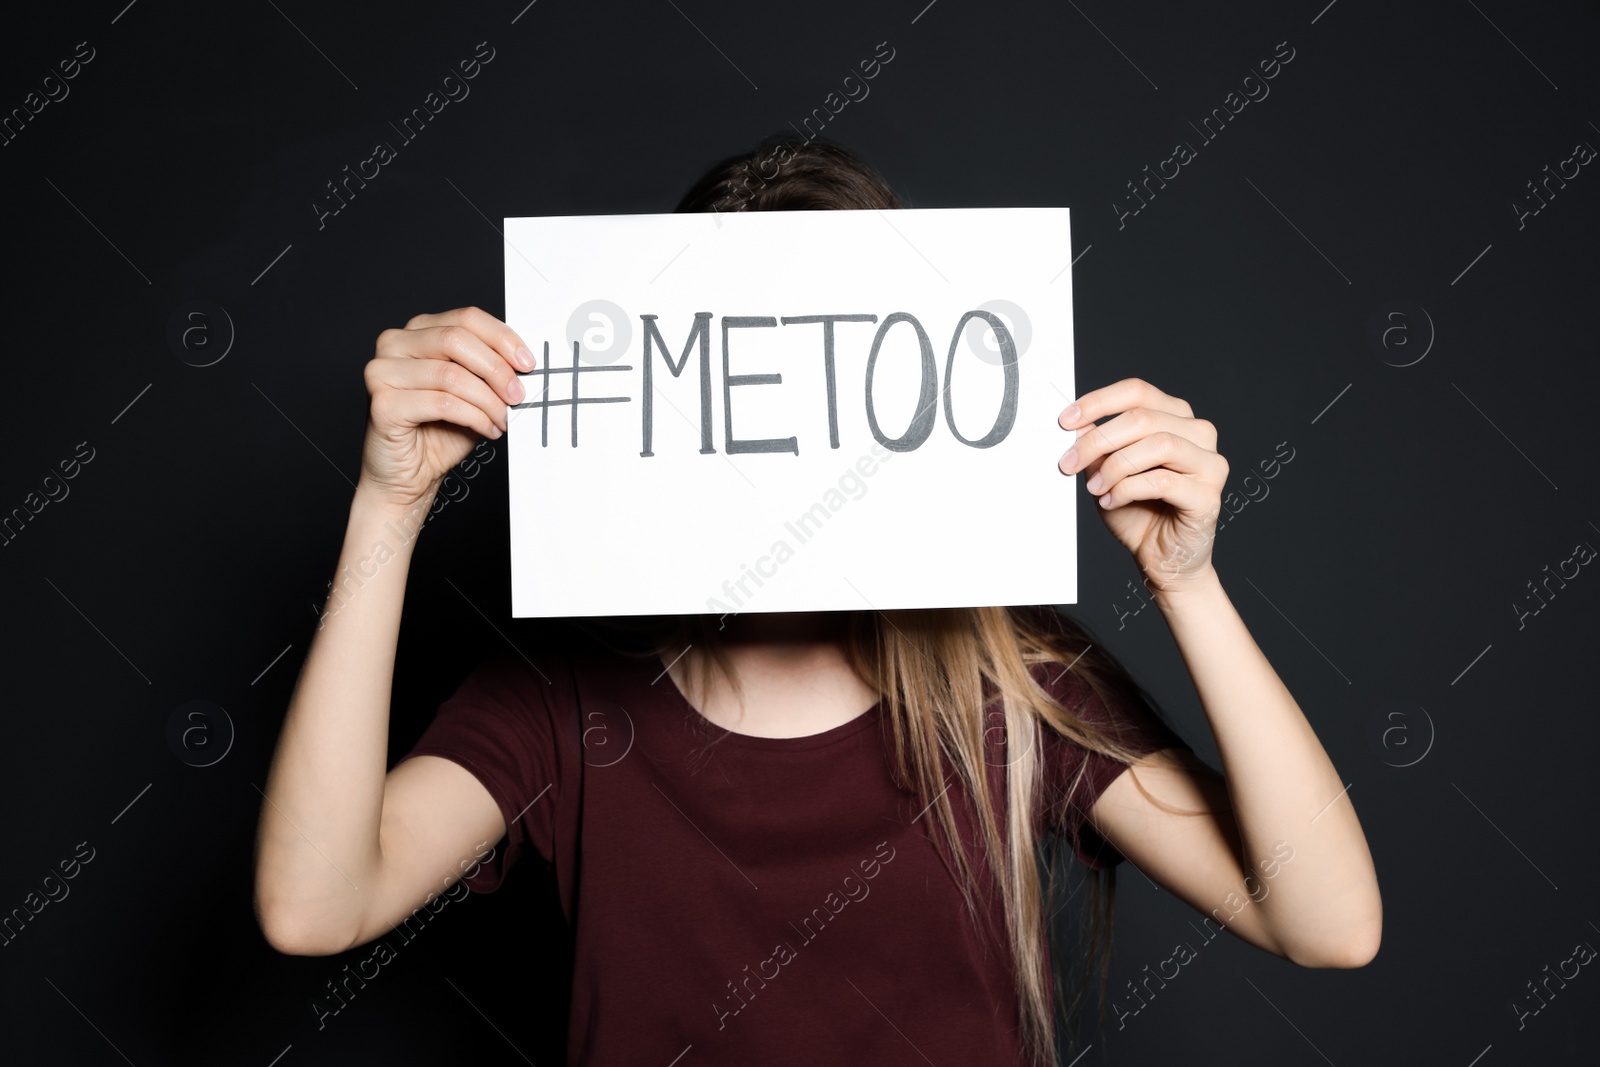 Photo of Young woman holding #METOO card against dark background